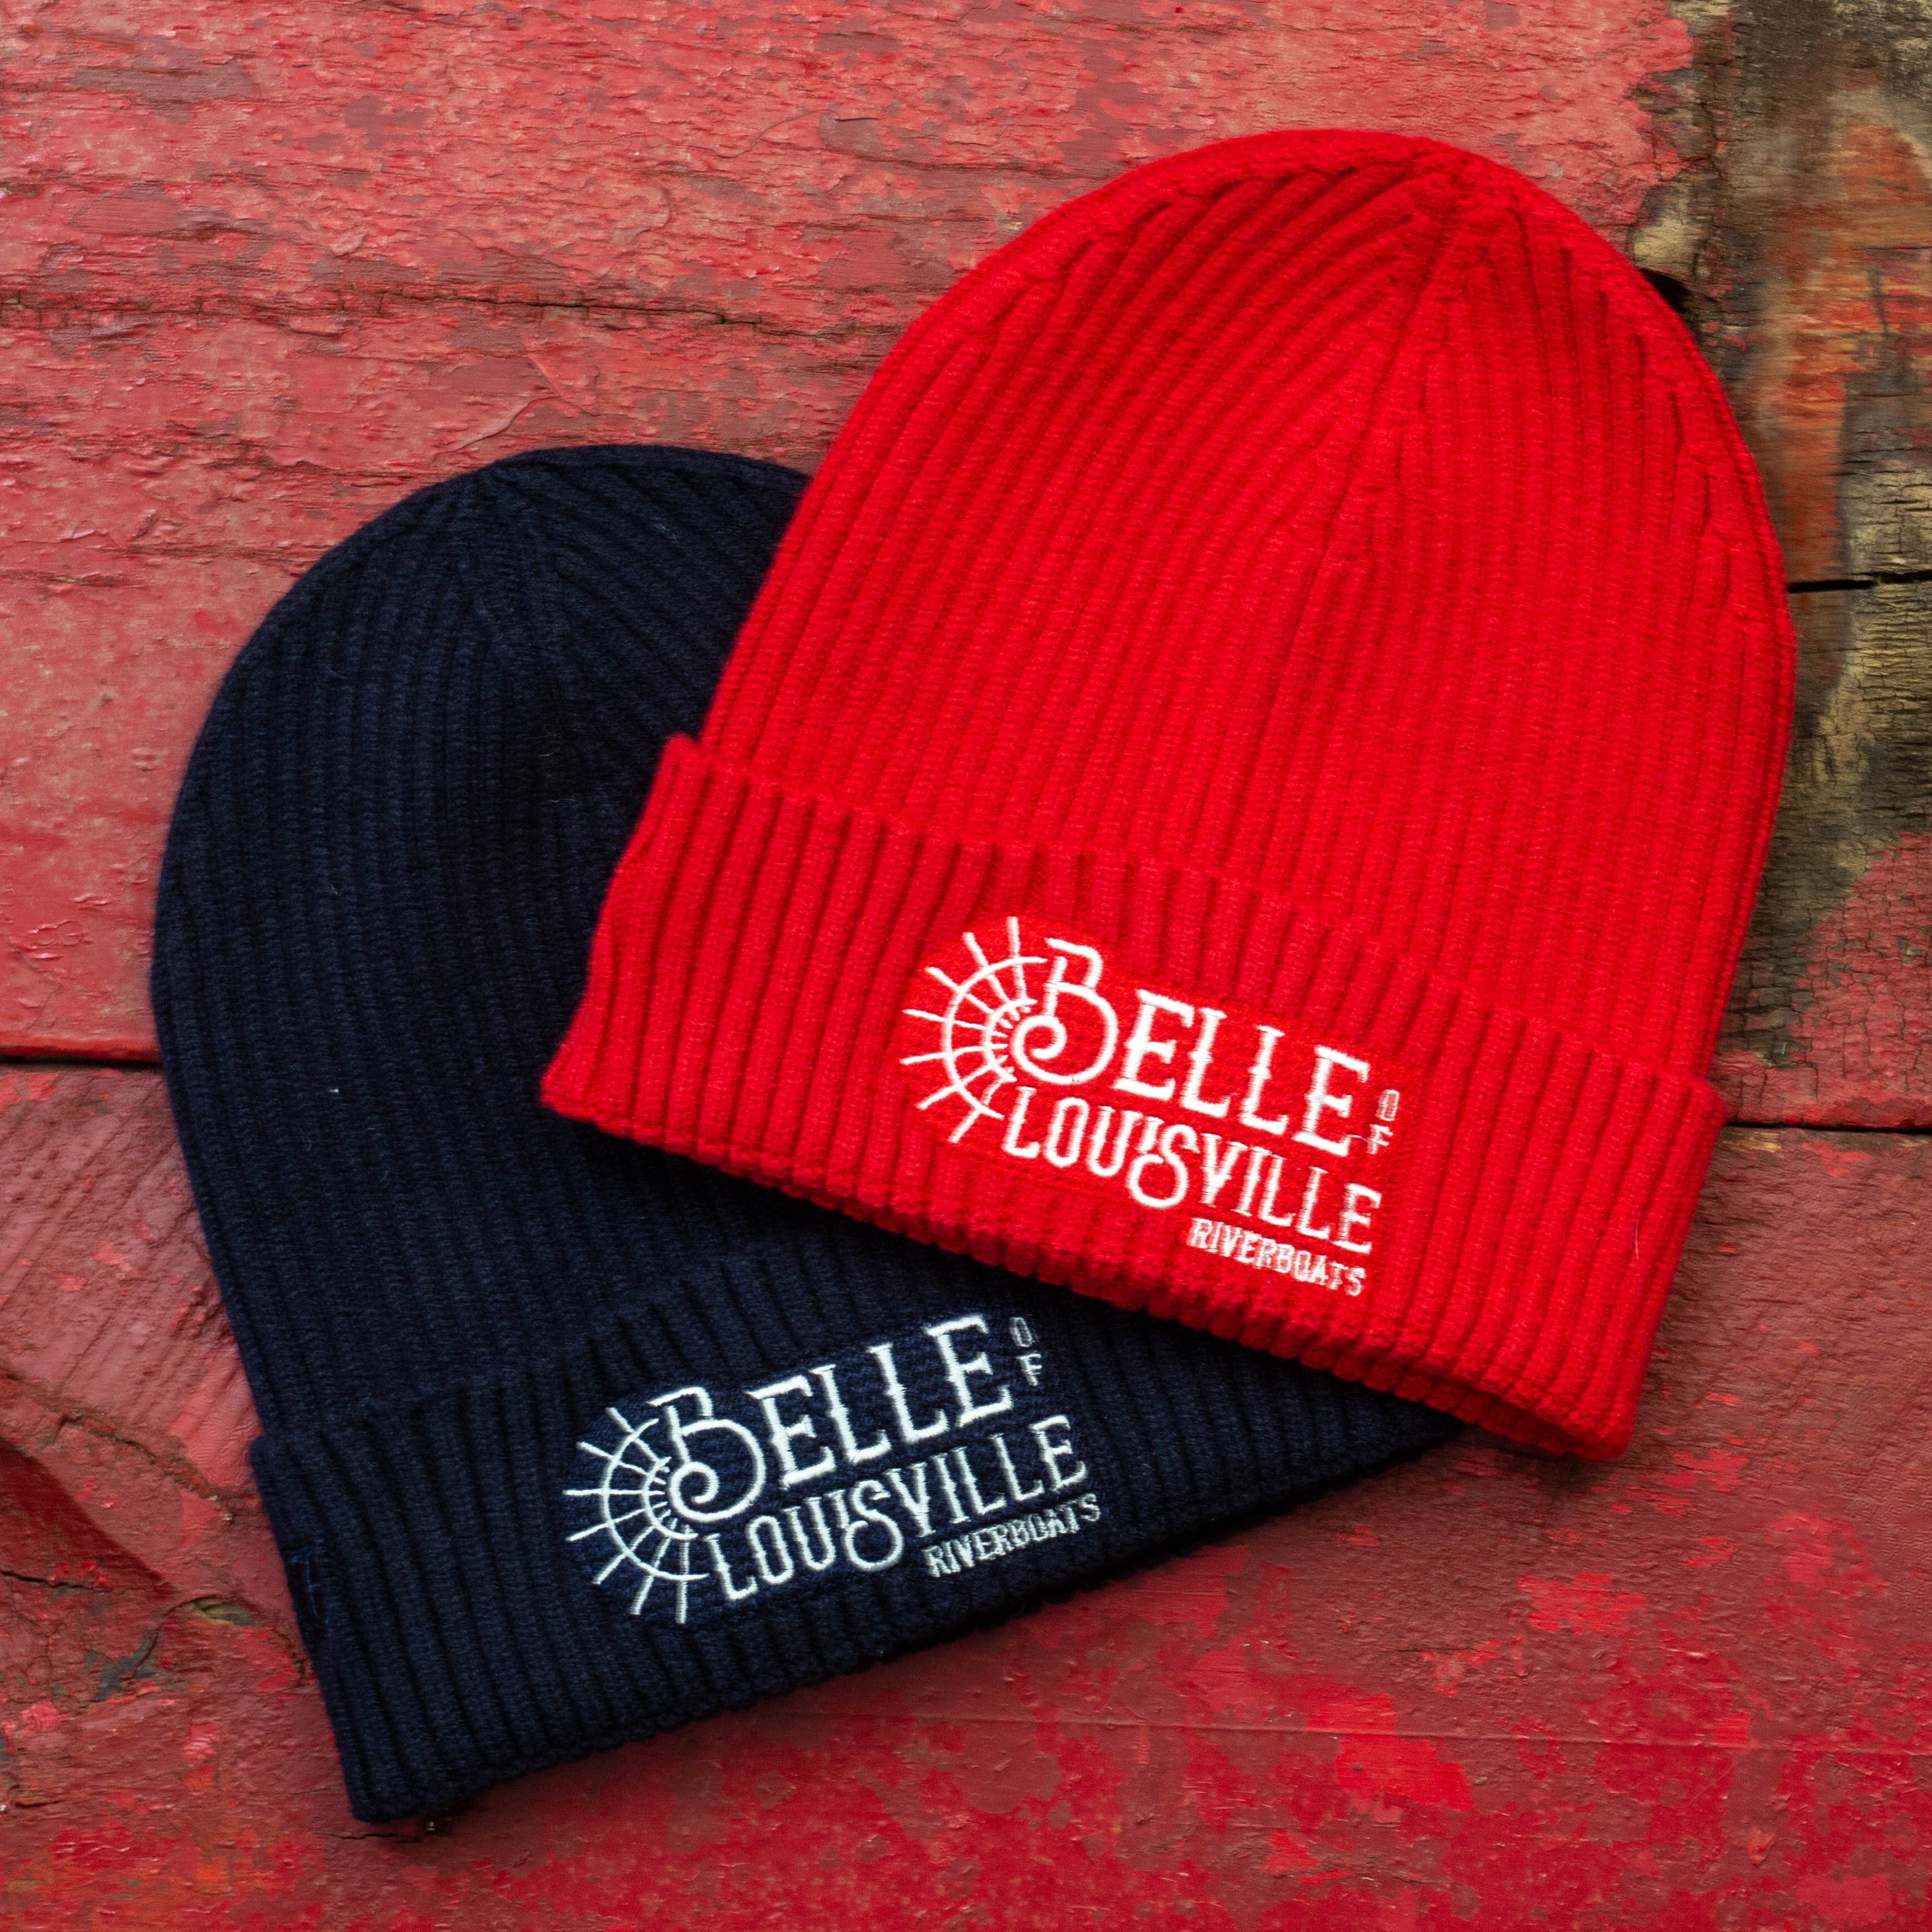 Belle of Louisville Beanie – The Boat-tique